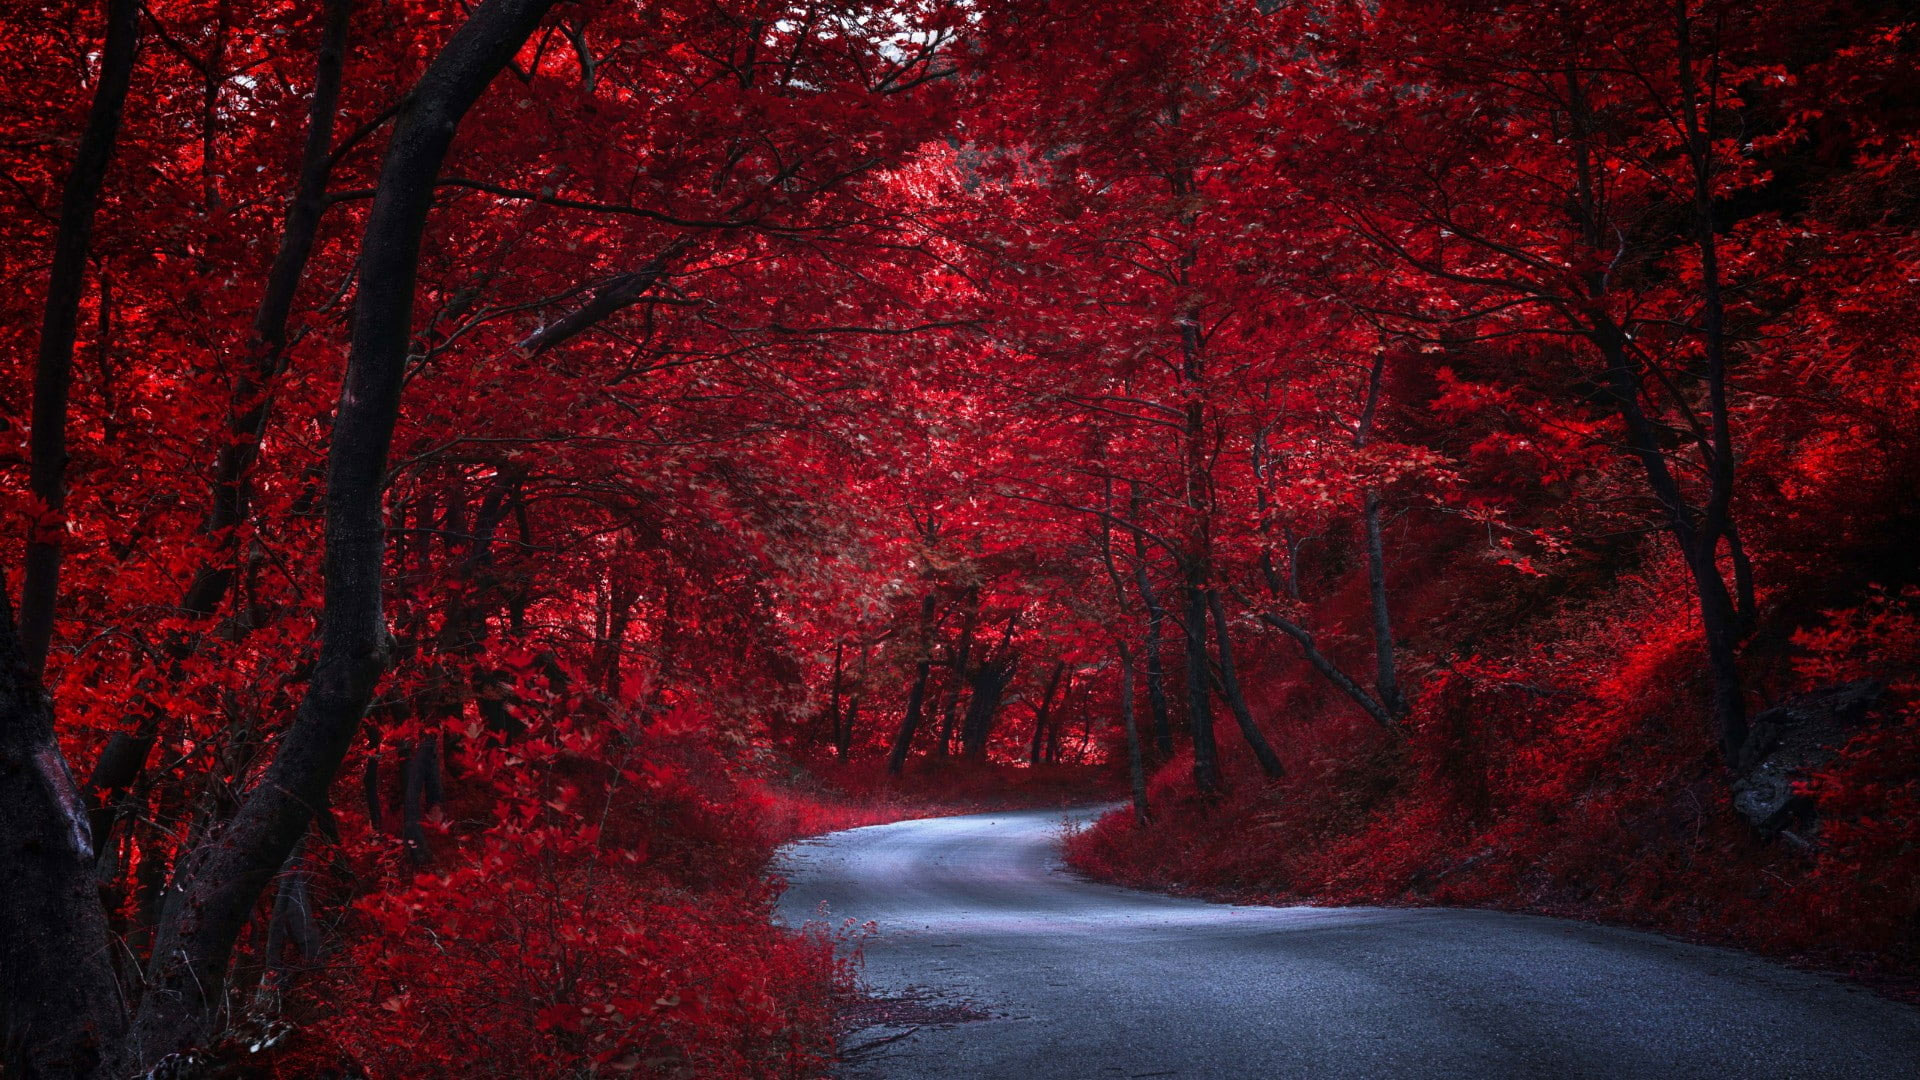 Red forest wallpaper, autumn, nature, road, tree, leaves, woody plant • Wallpaper For You HD Wallpaper For Desktop & Mobile